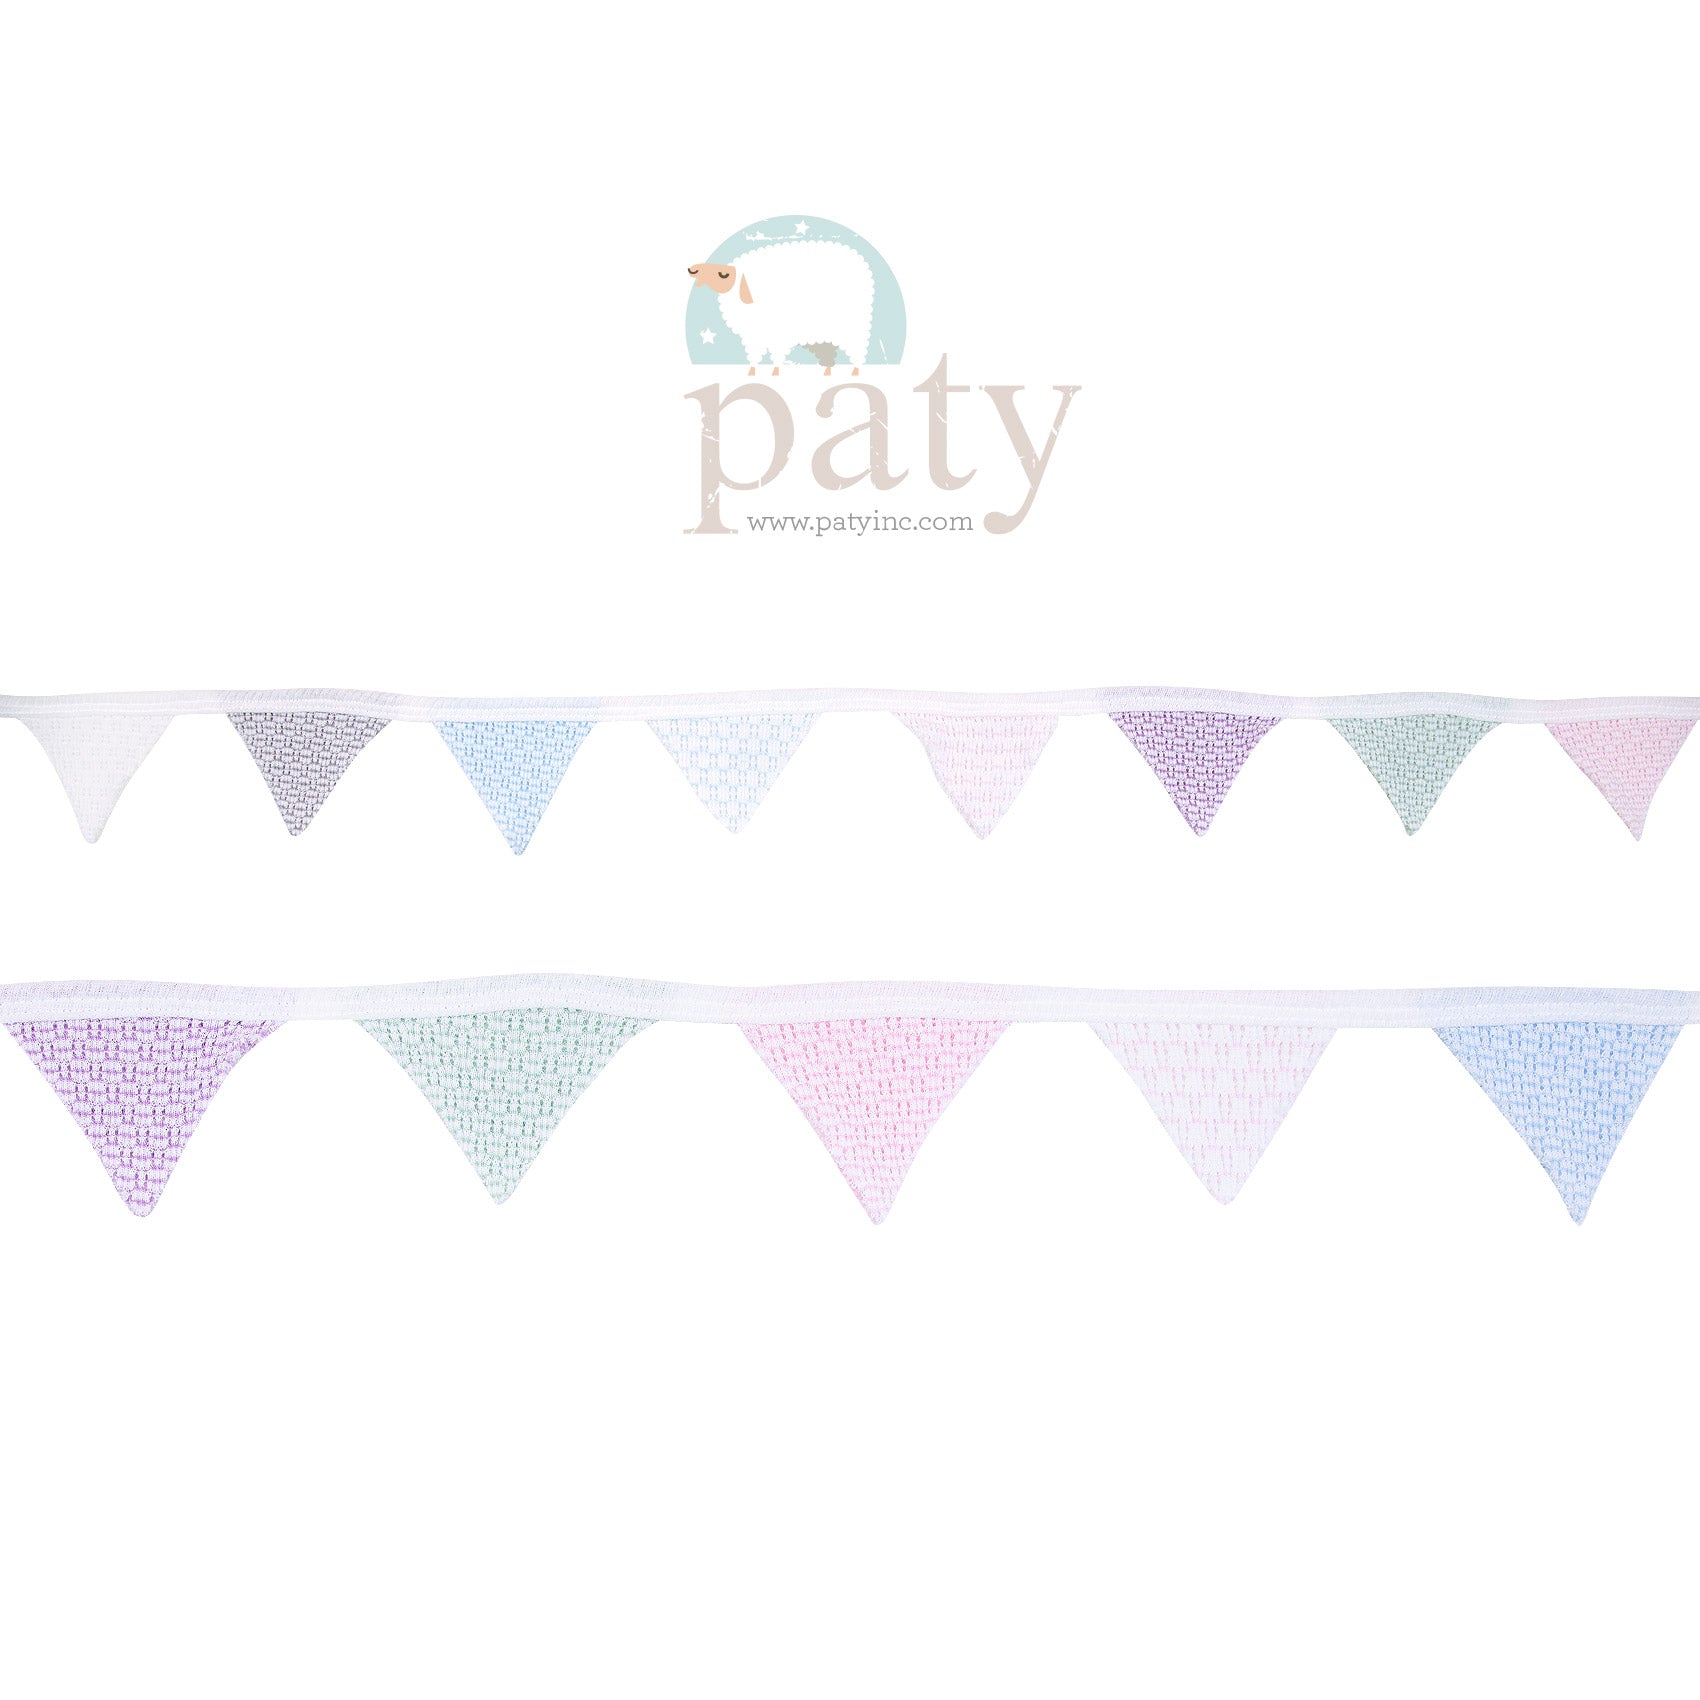 Paty Banner. Mini or Large.